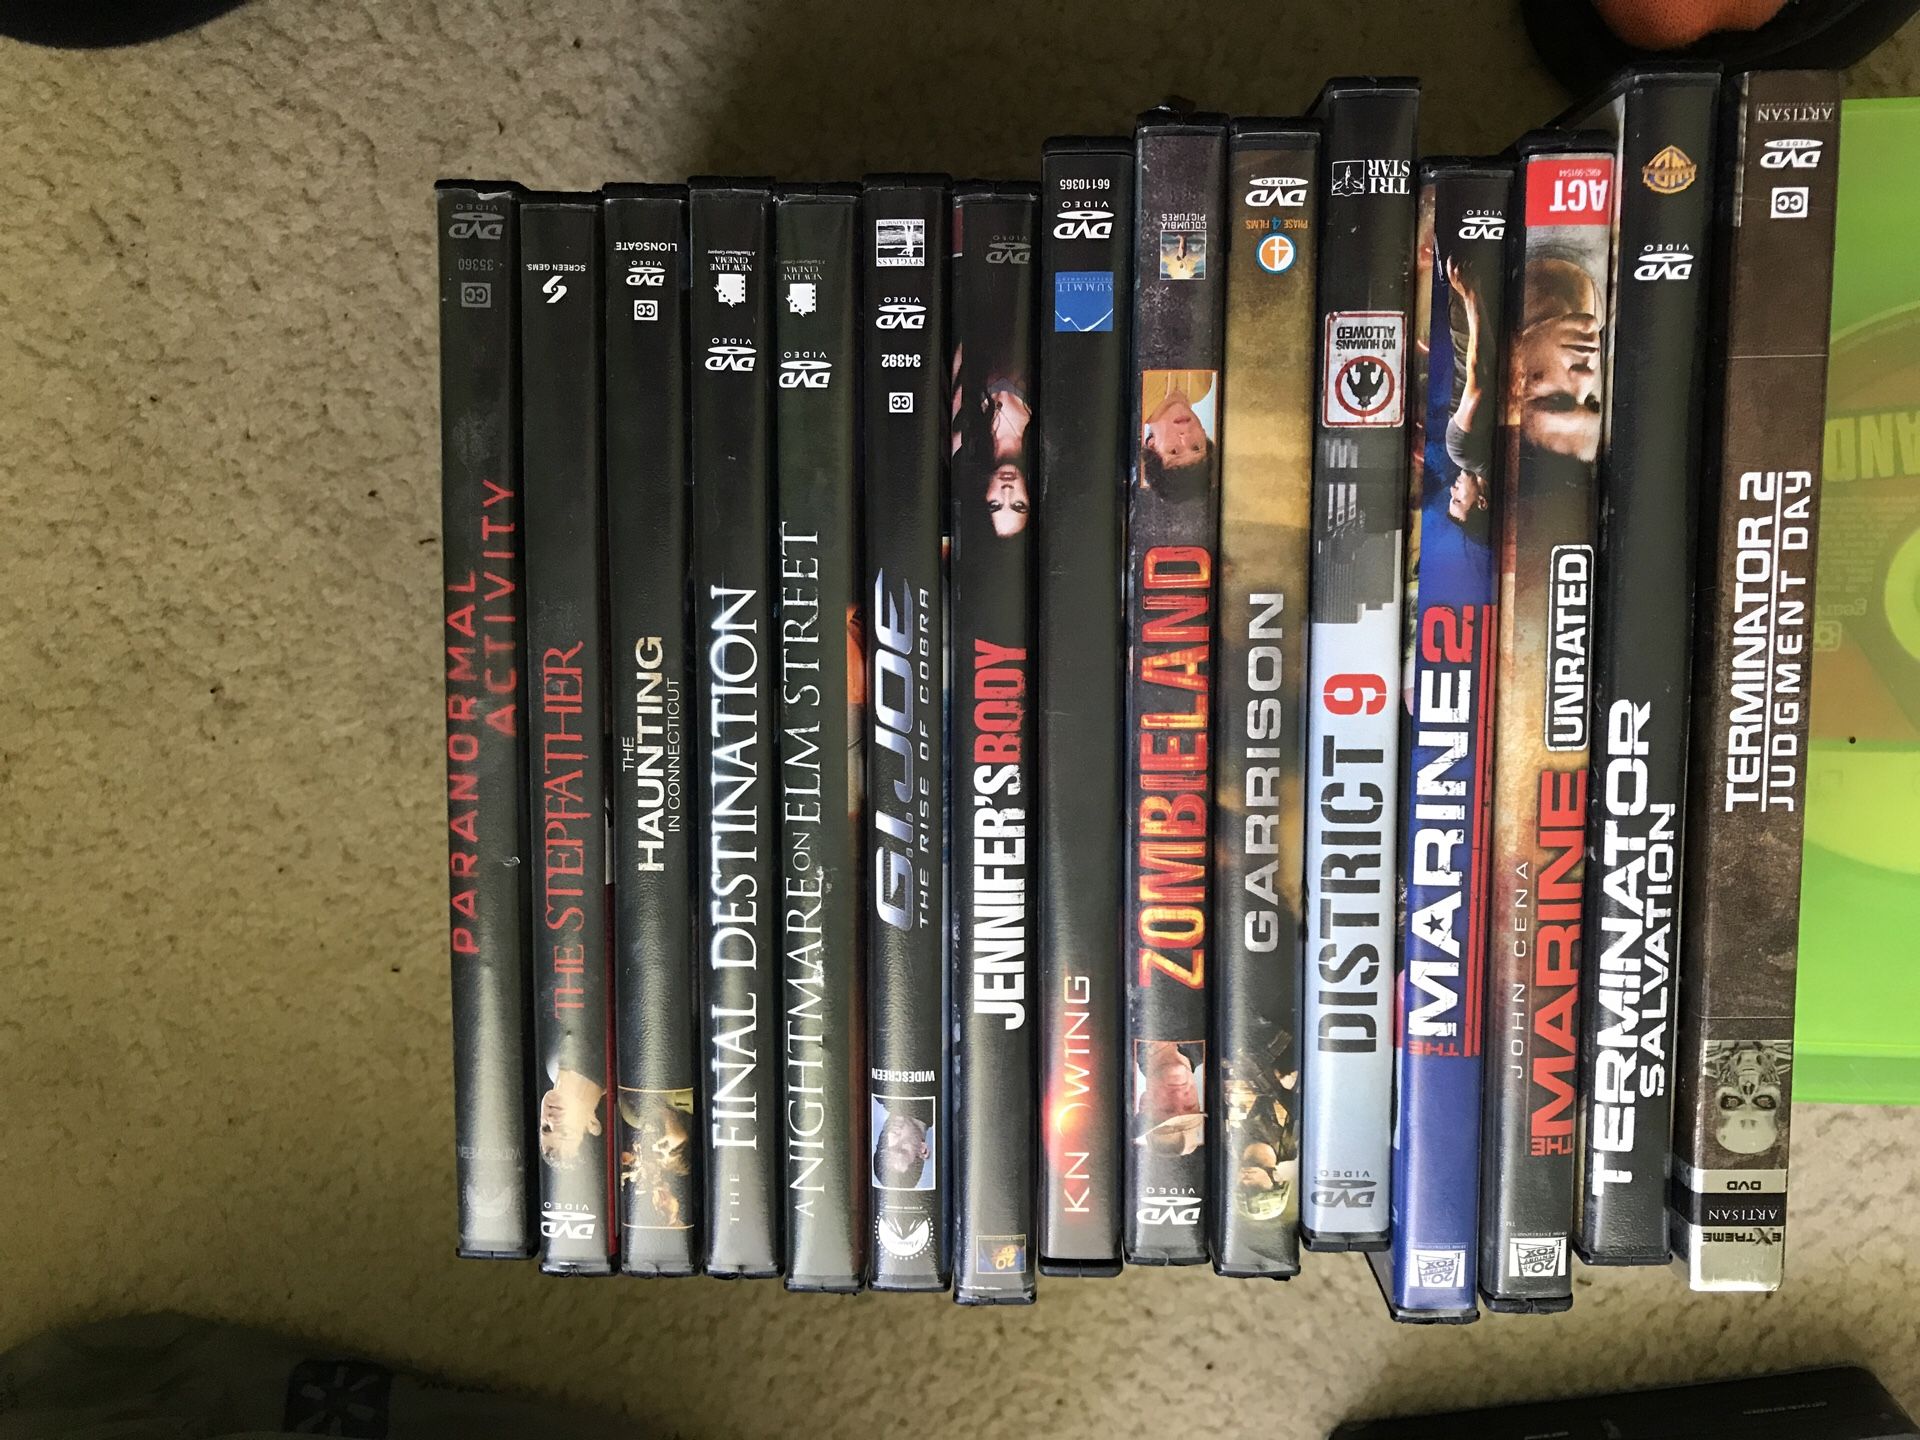 5 for $20 dvd movies